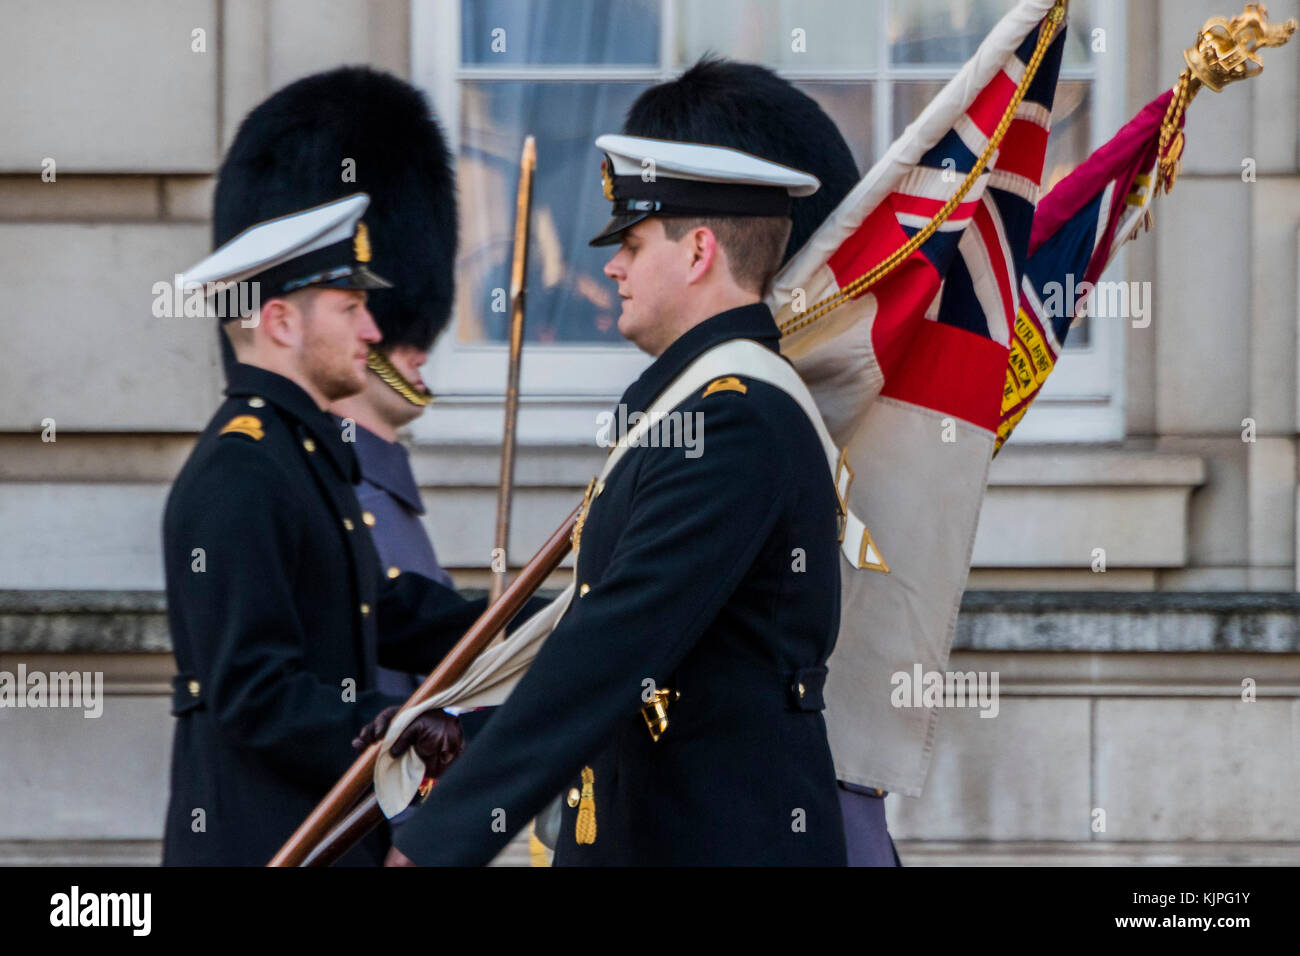 London, UK. 26th Nov, 2017. The White ensign and Regimental colours are paraded together - The Royal Navy take over the guard duty at Buckingham Palace for the first time. They take part in the traditional 'Changing the Guard' ceremony, taking over from one of the Regiments of Foot Guards. Credit: Guy Bell/Alamy Live News Stock Photo